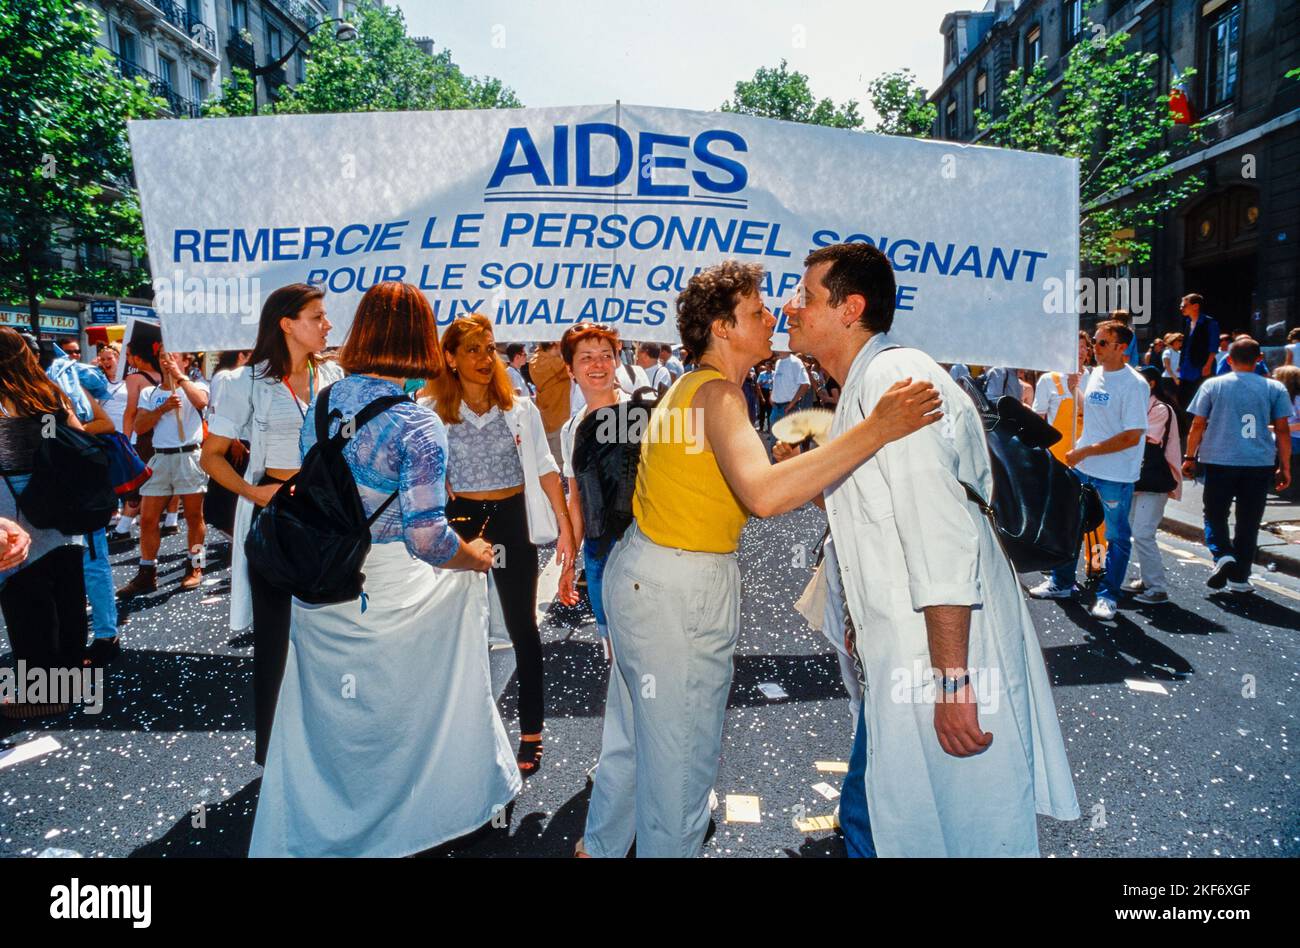 Paris, France, Large Crowd People, Marching in Gay Pride, LGBTQI+, AIDES NGO With Banner in Support of Health Care Workers, aids 1990s, logo, greeting, Kissing, epidemic and plague france Stock Photo